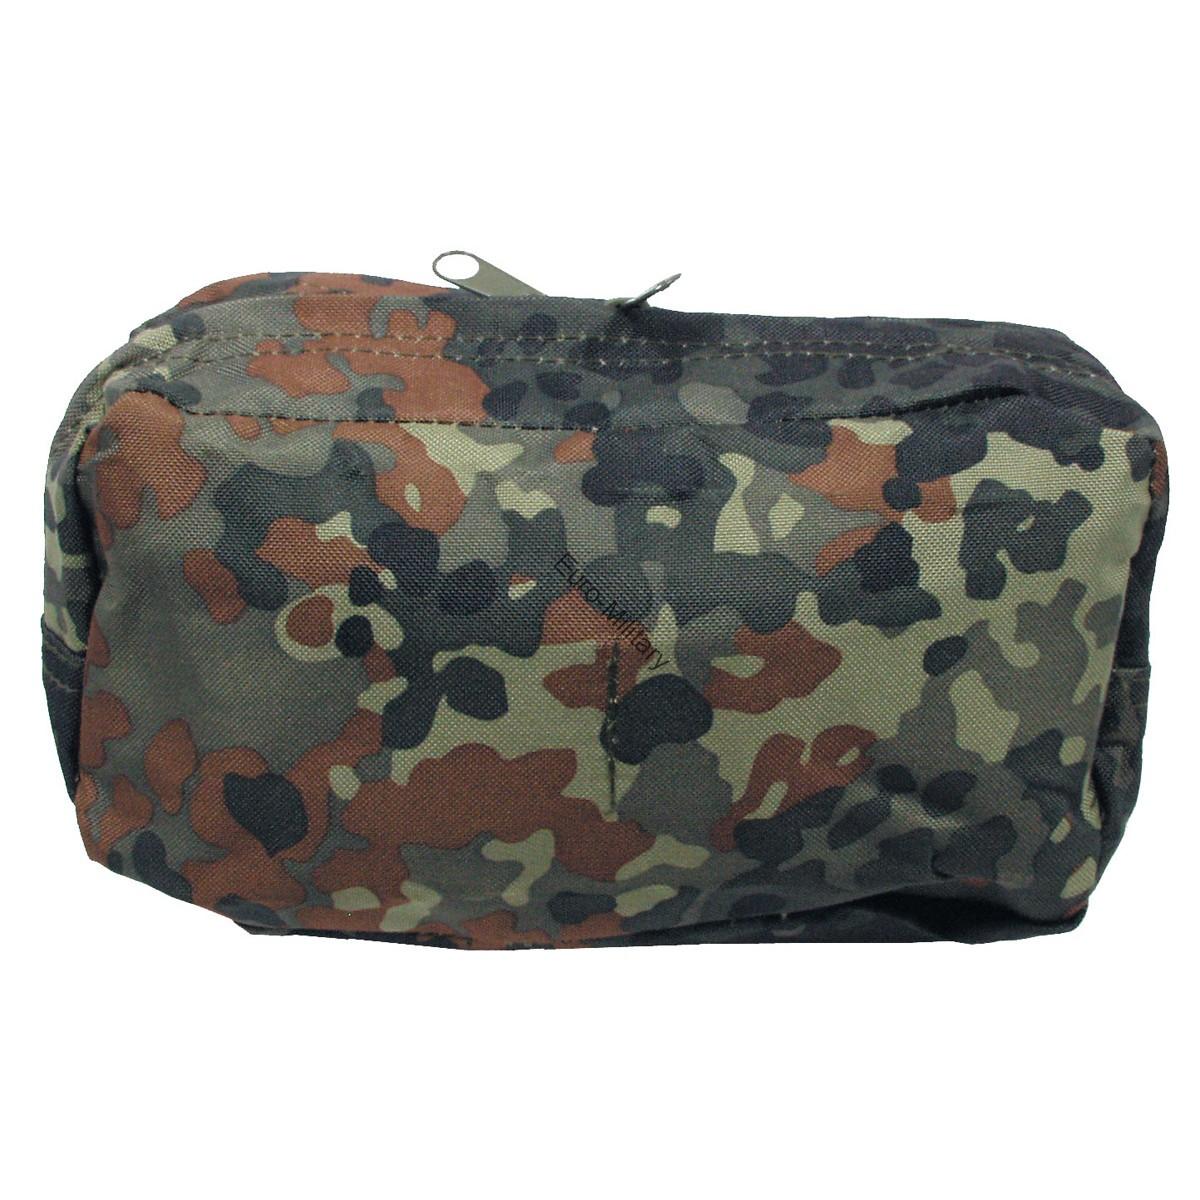 Tactical Utility Mollle Large Pouch - BW German Army Camo Flectarn